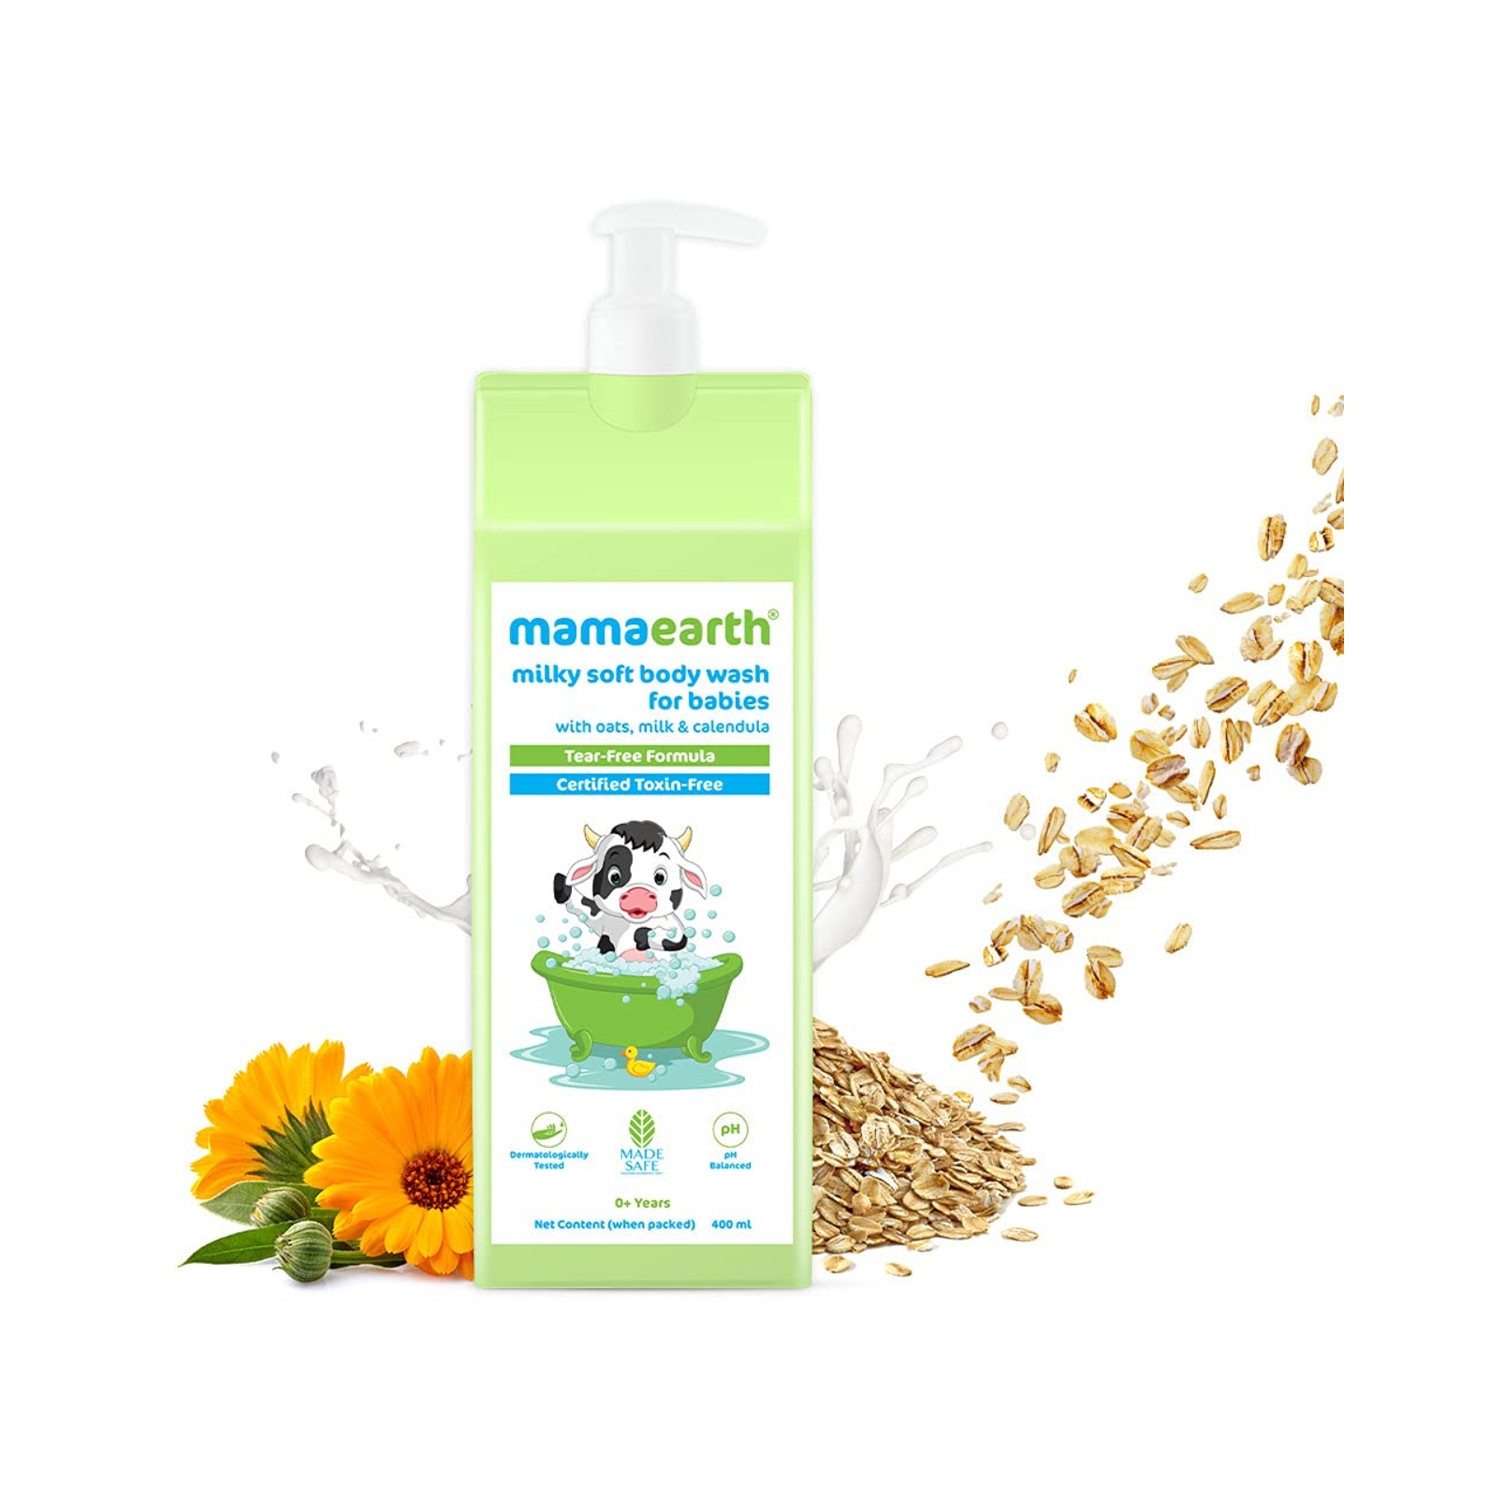 Mamaearth Milky Soft Body Wash For Babies With Oats Milk And Calendula (400ml)